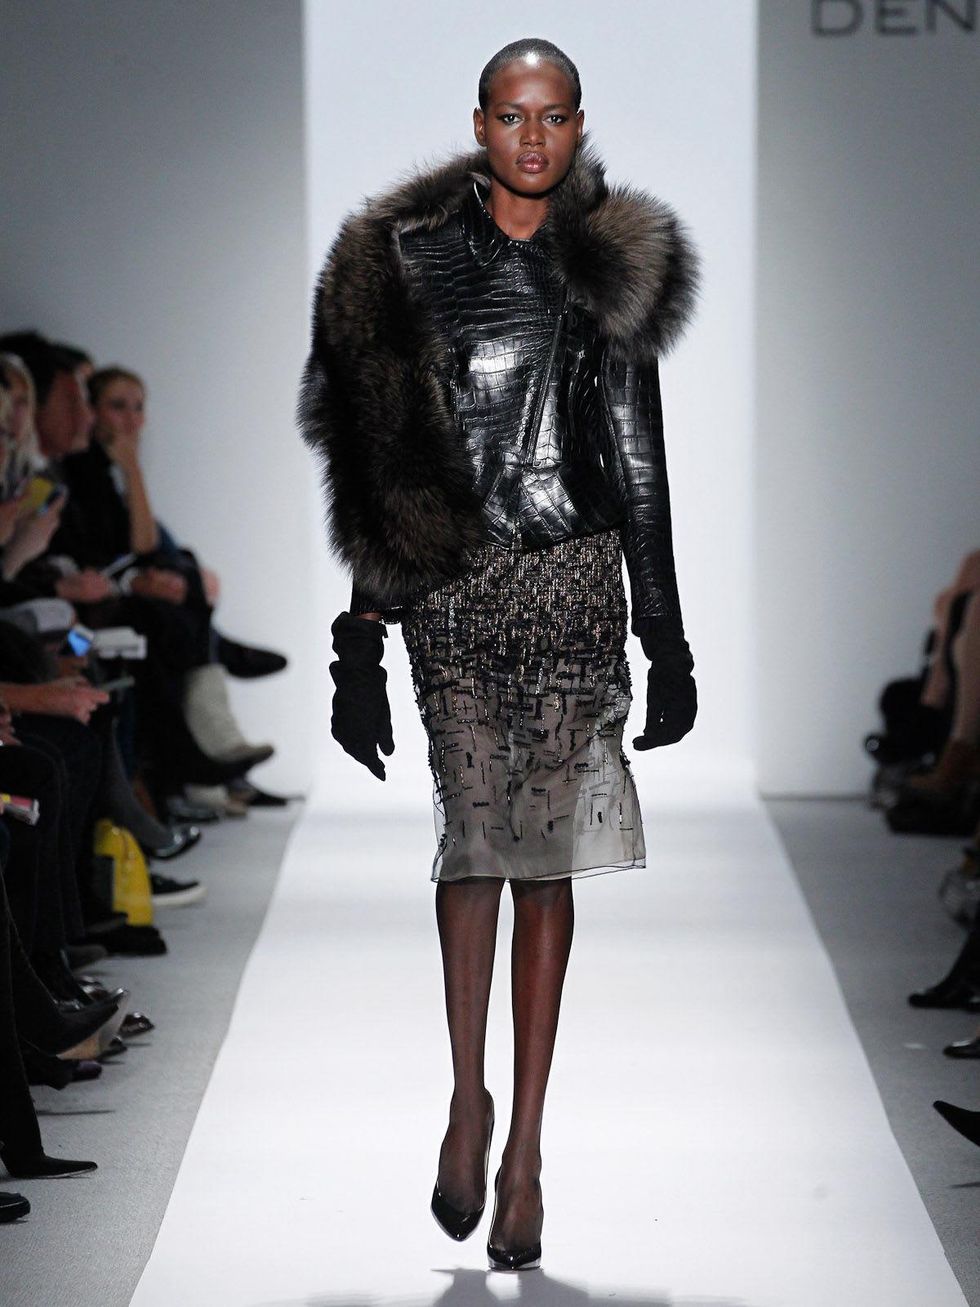 Fashion Week fall 2013, Dennis Basso, February 2013, leather and fur short coat